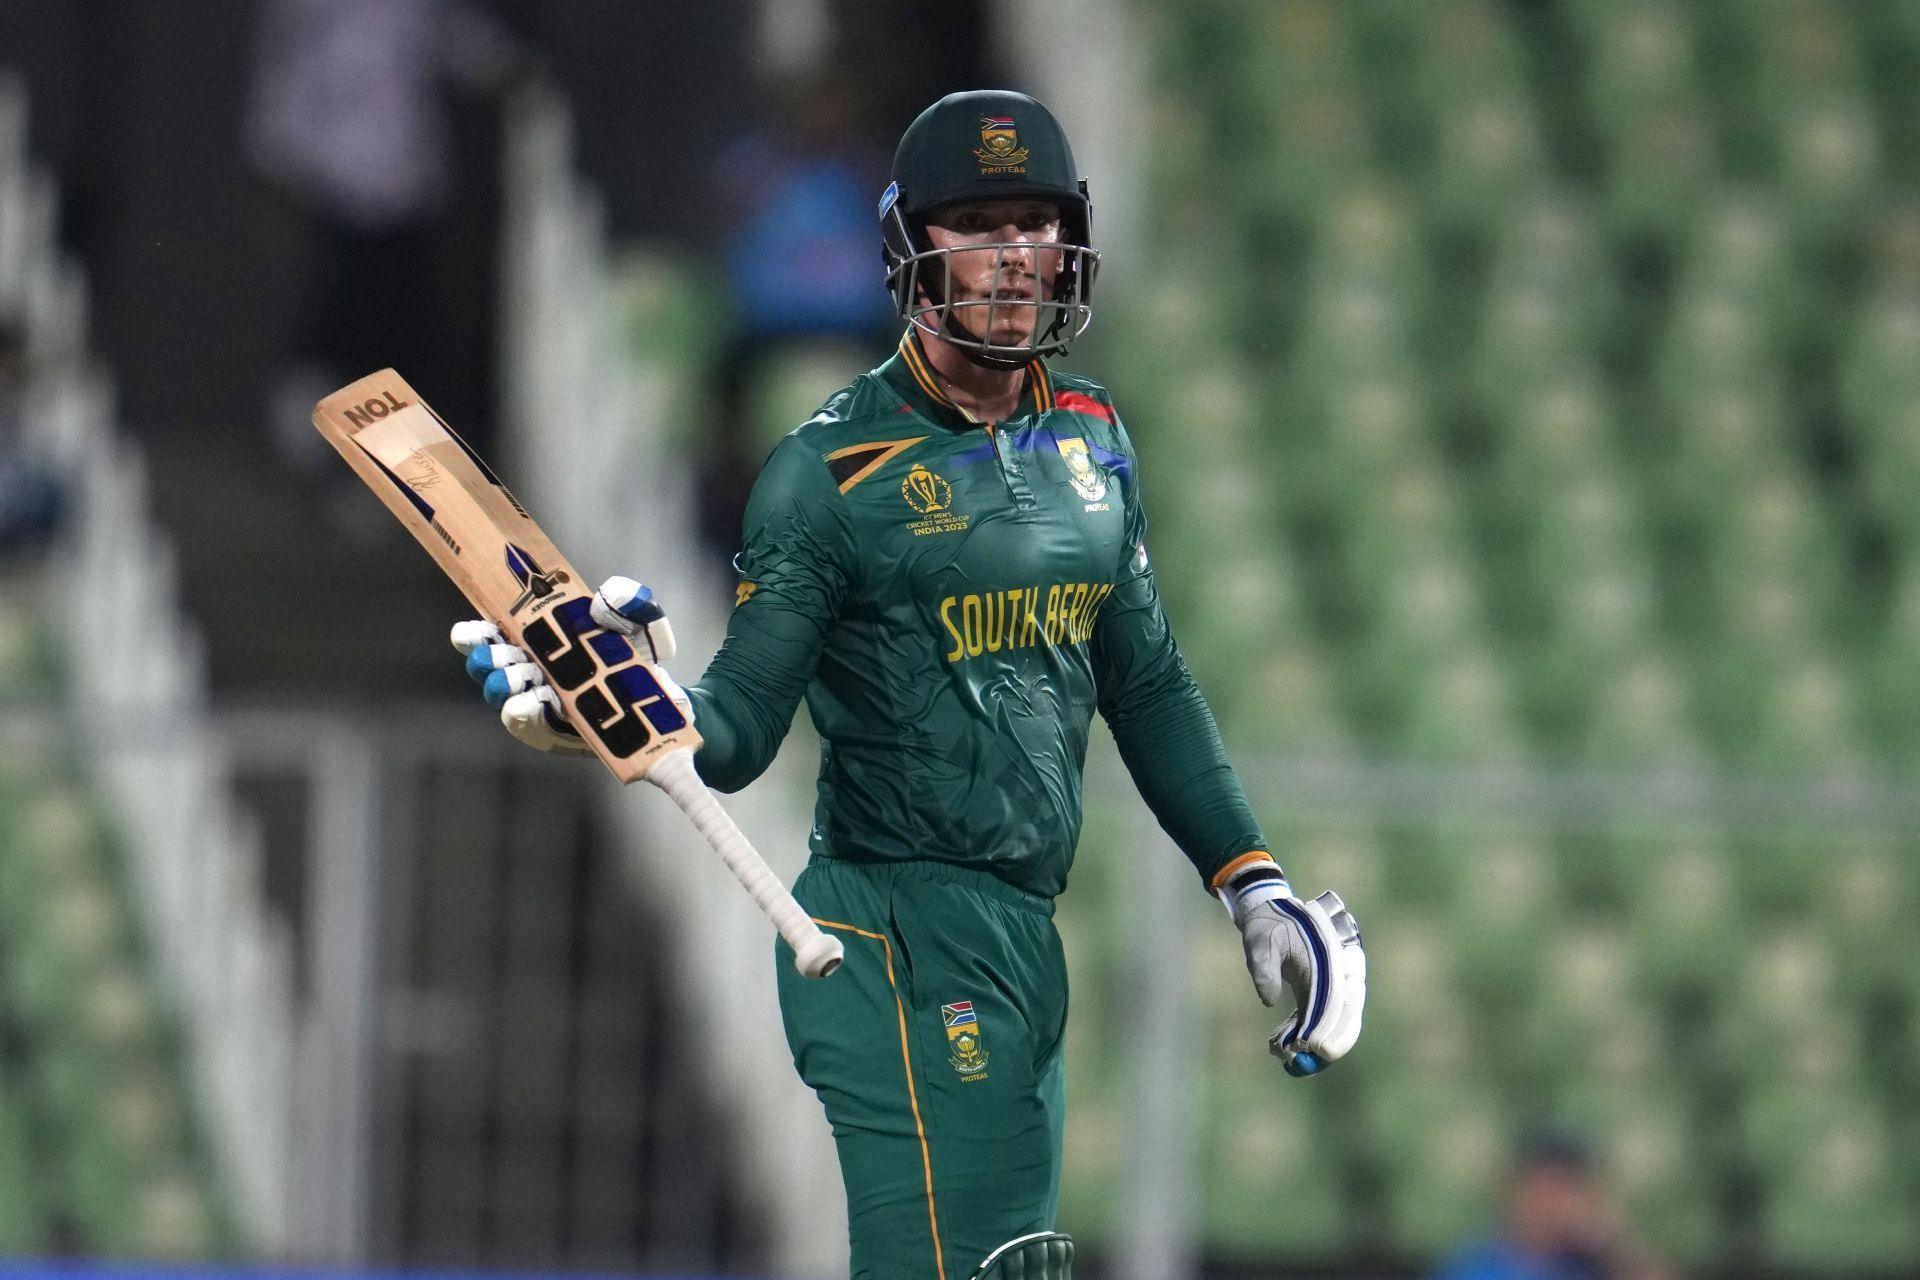 Rassie van der Dussen could be a crucial player for South Africa at the World Cup